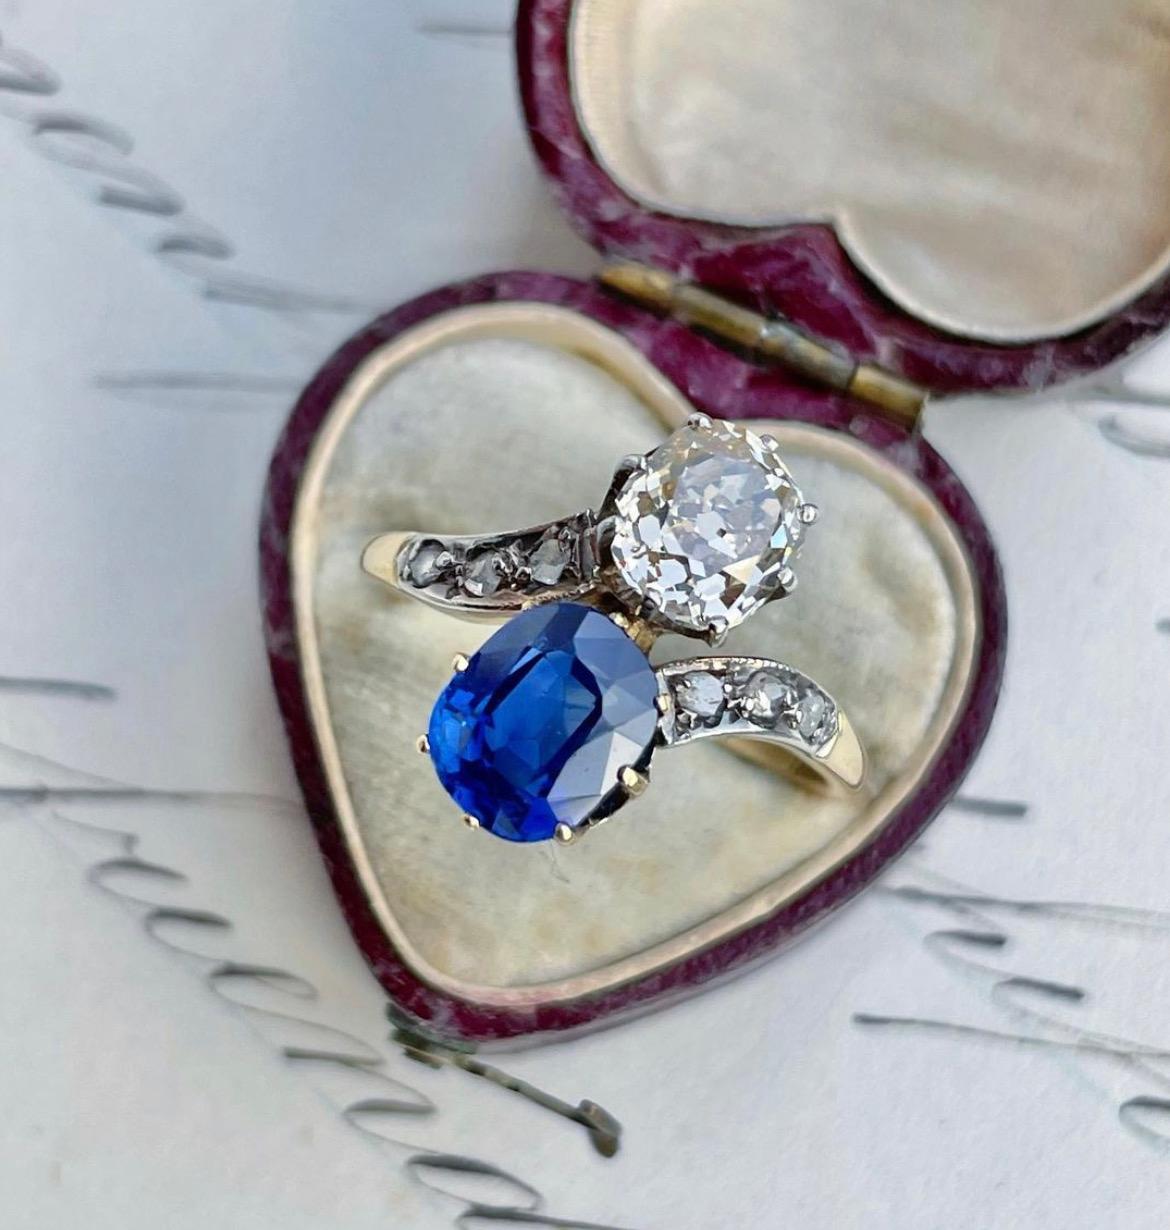 This romantic Edwardian era toi et moi ring features a velvety blue 1.63 carat natural, unheated sapphire seated side-by-side with a 1.10 carat old cushion cut diamond, fabricated in platinum topped 18k gold and nicely finished with rose cut diamond